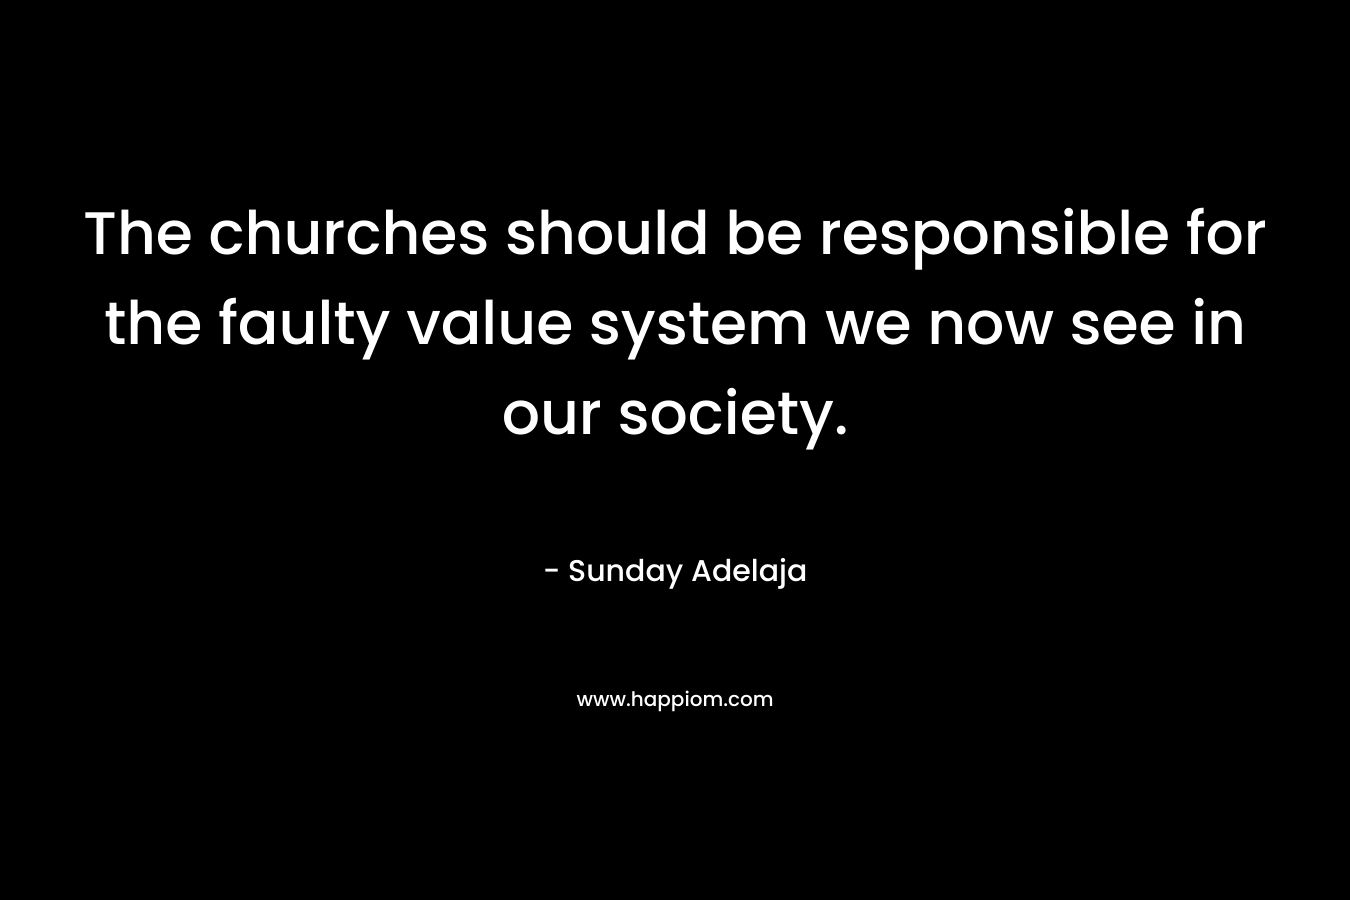 The churches should be responsible for the faulty value system we now see in our society. – Sunday Adelaja